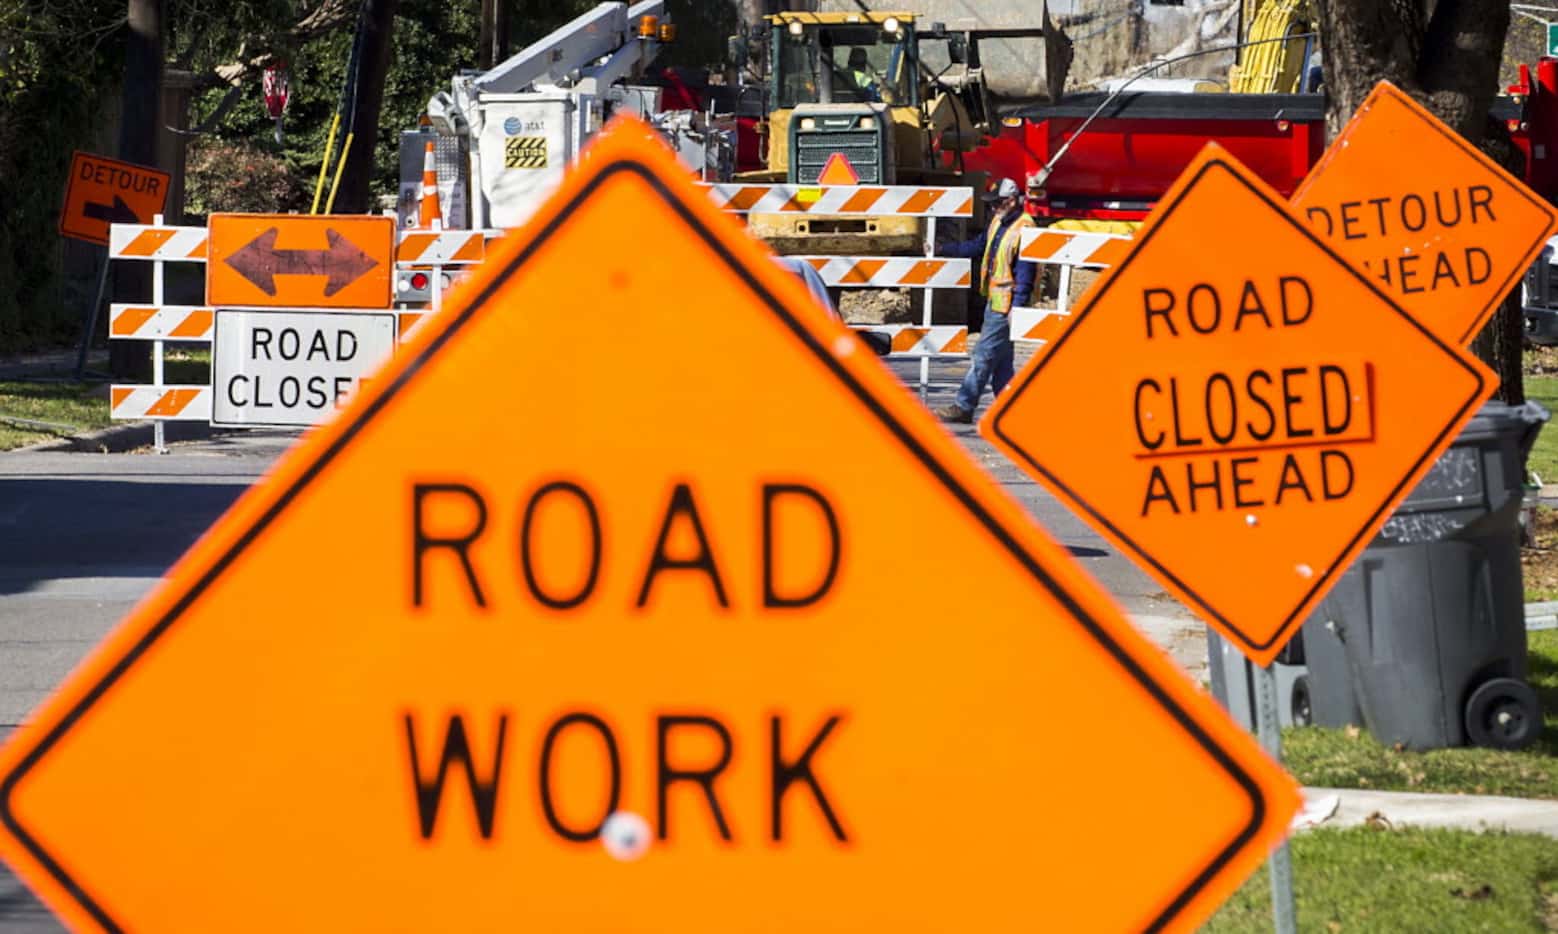 Signs point the way to a detour as crews work on street construction.